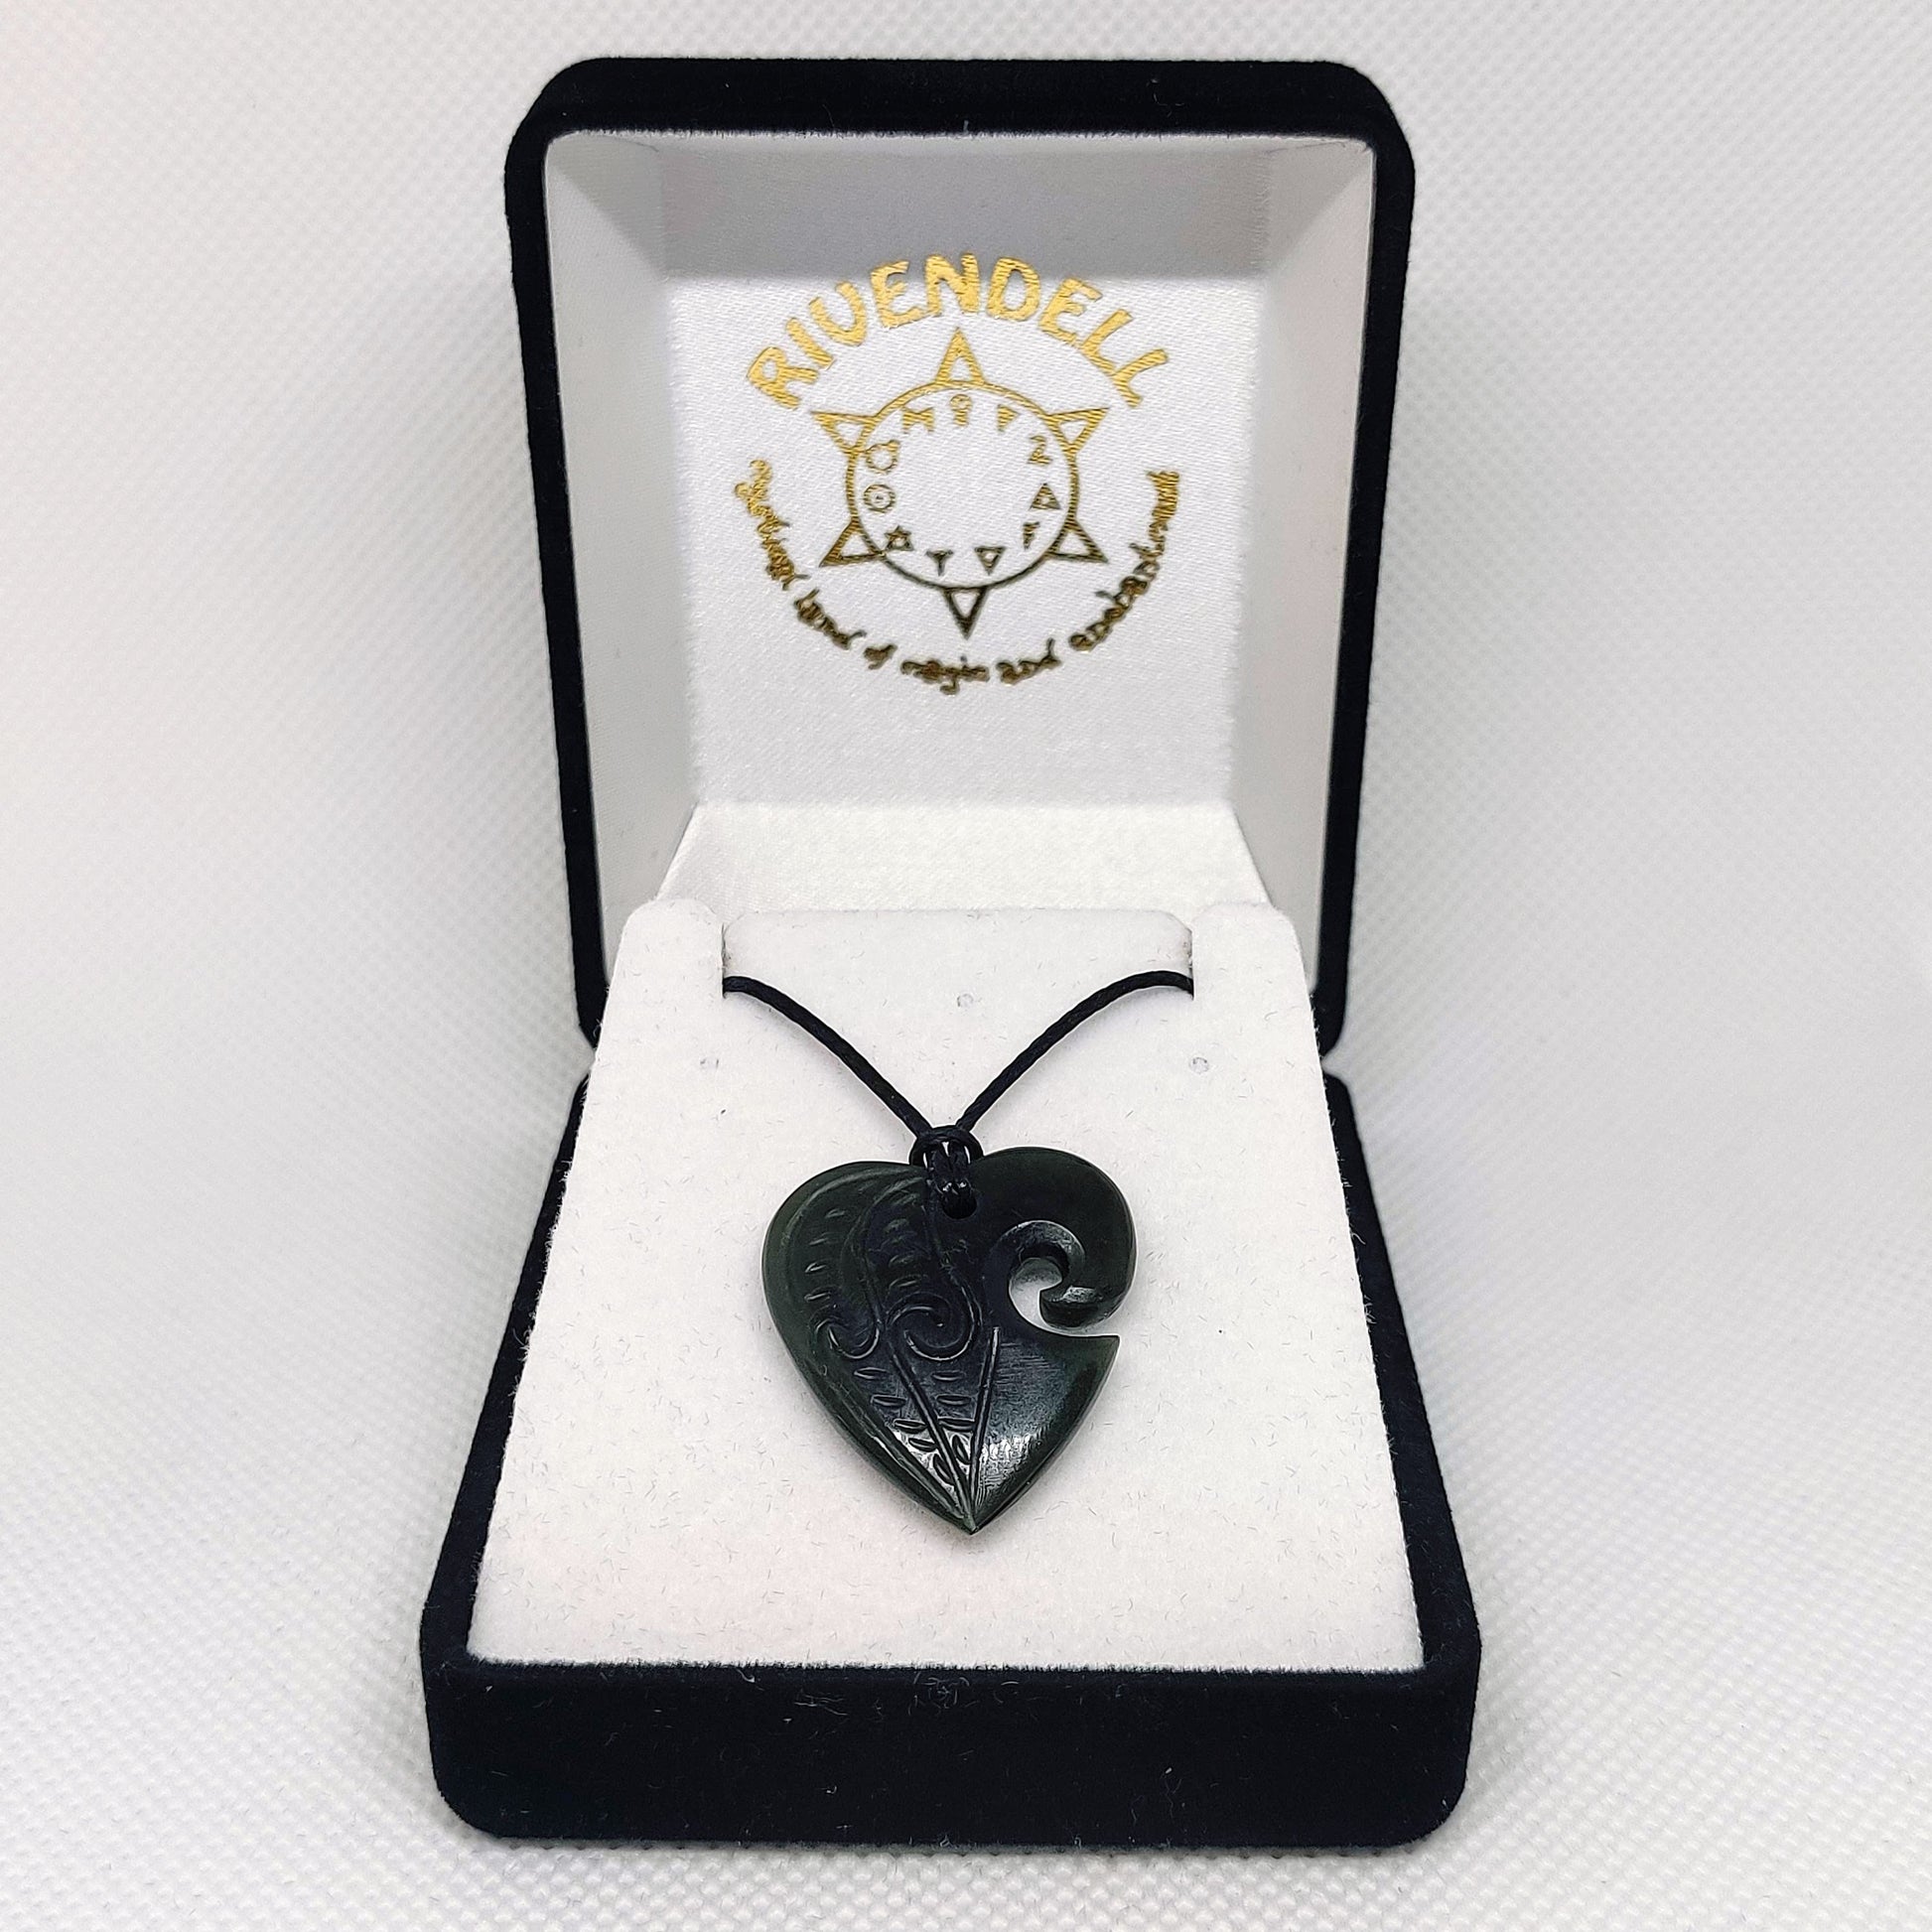 Heart Greenstone Pendant with Carved Detail - Rivendell Shop